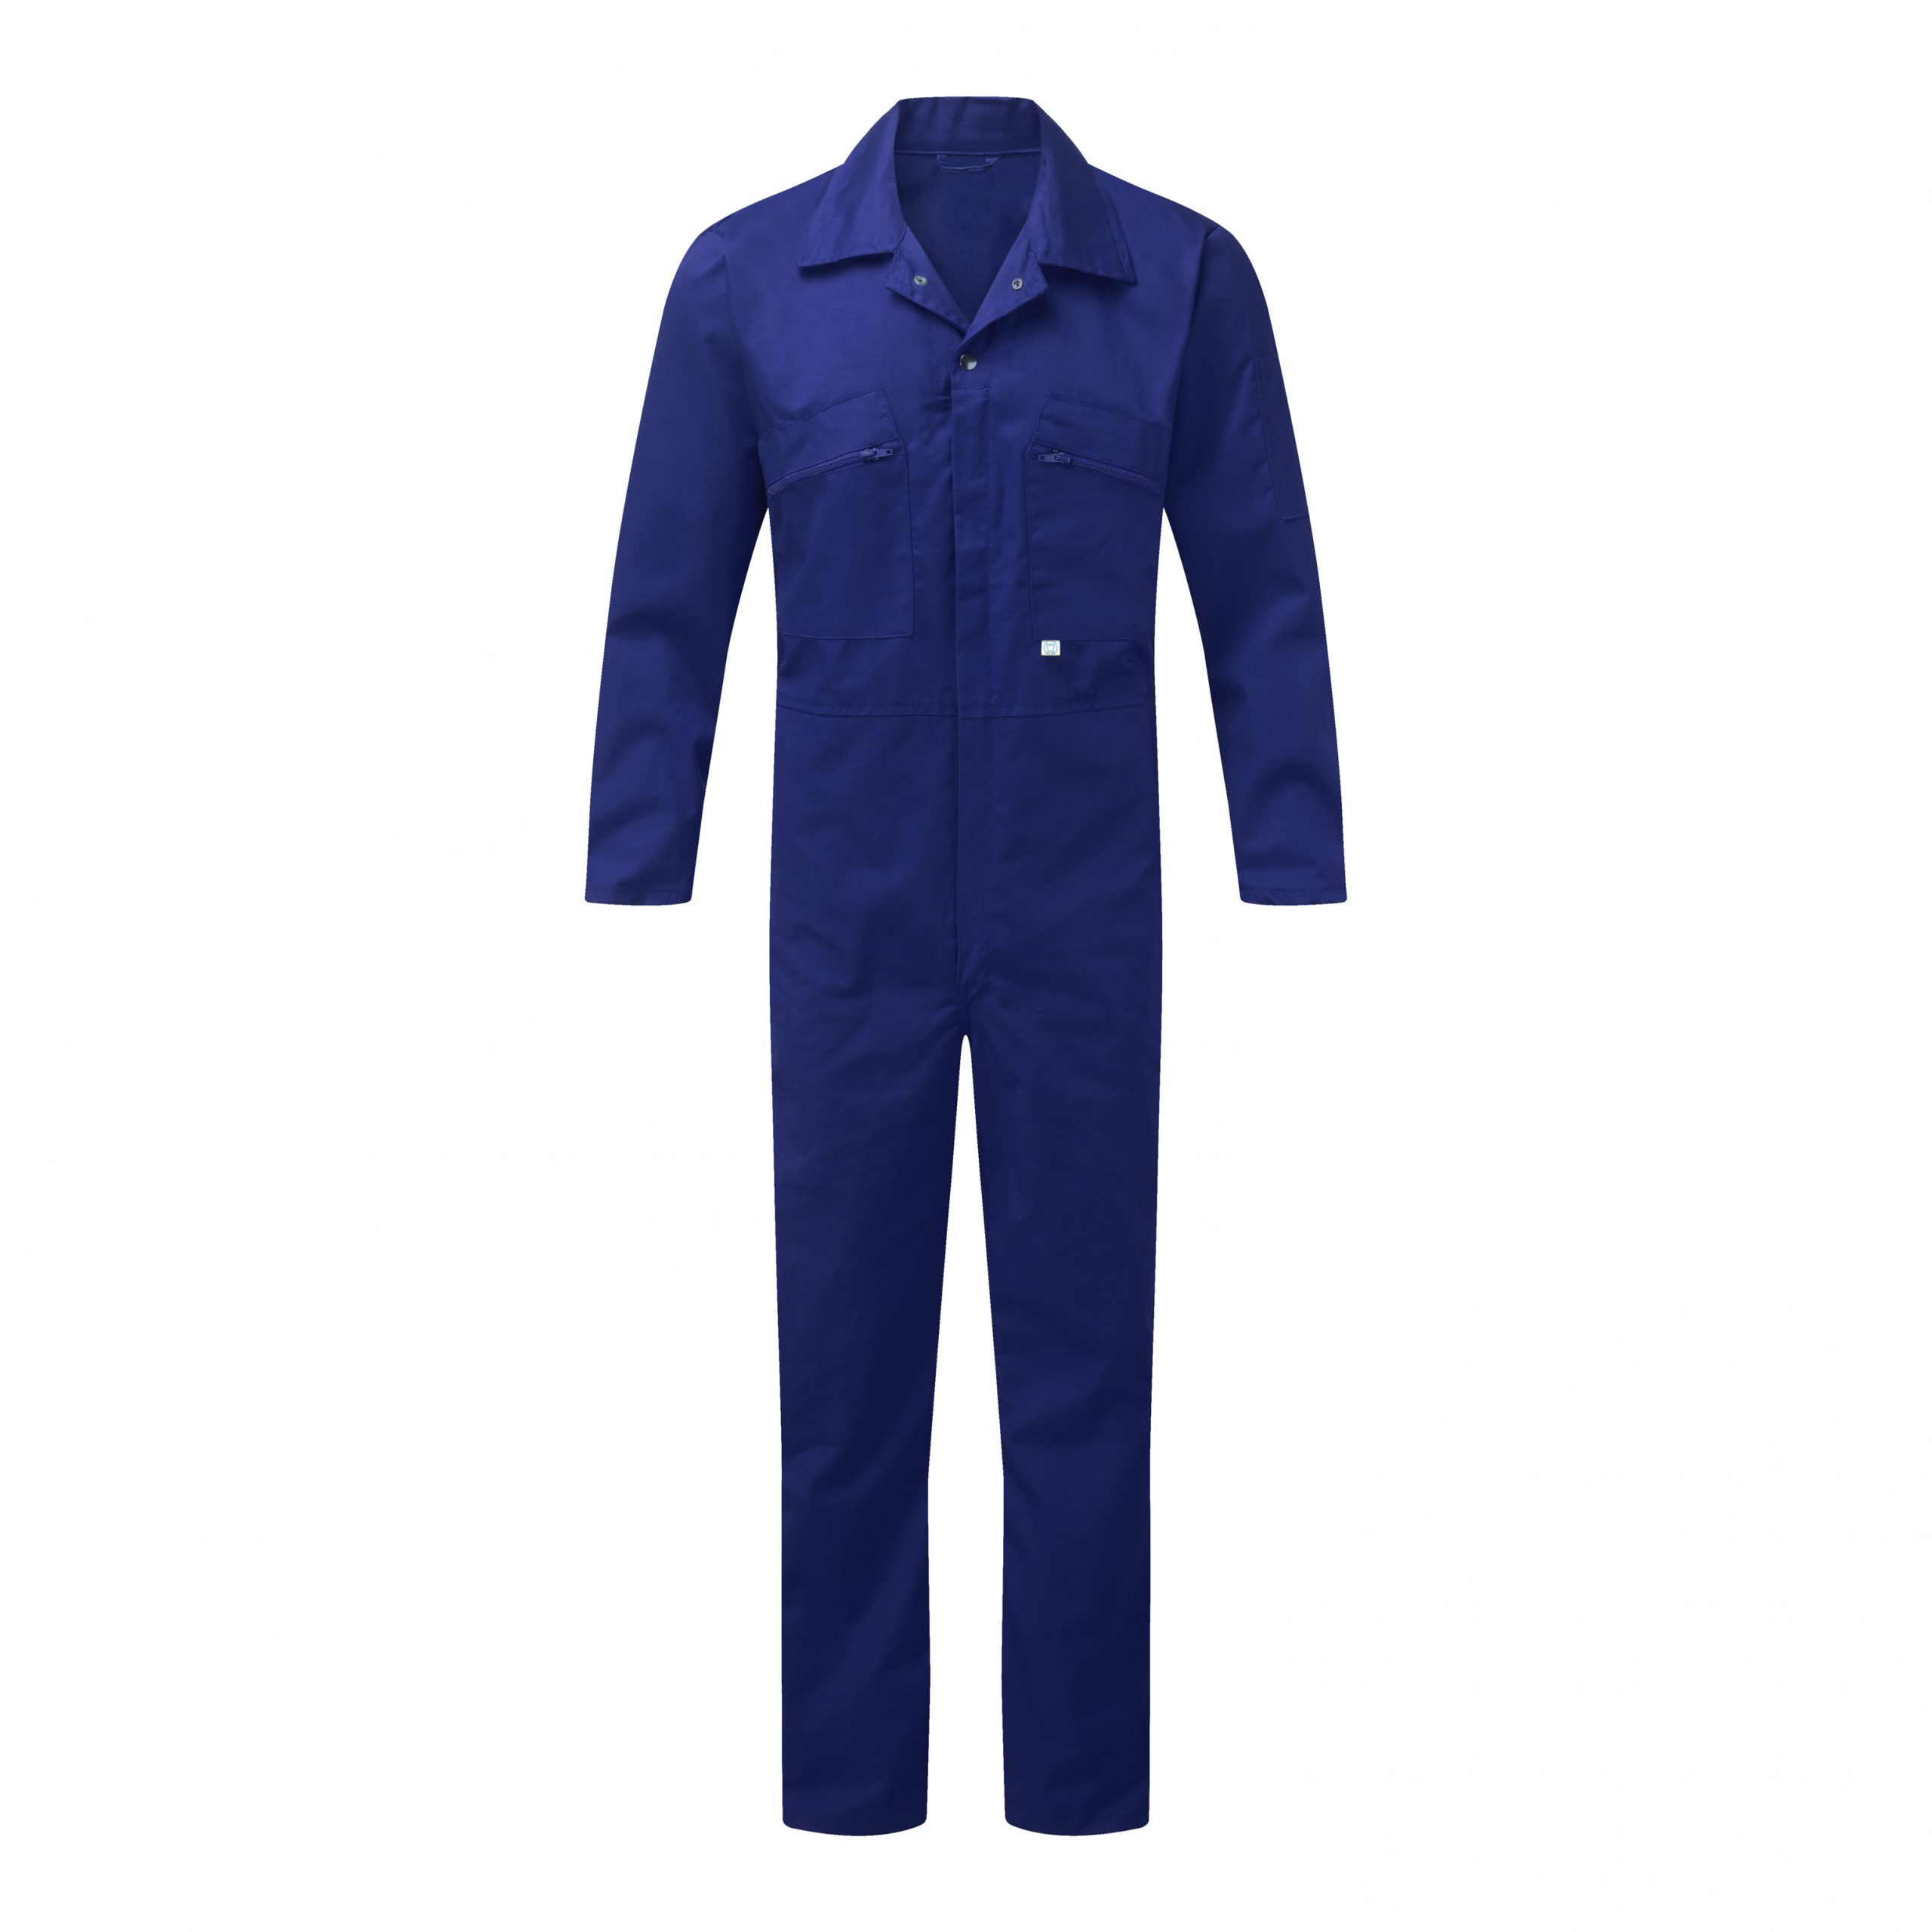 Blue Castle 366/NV-34 34-Inch Zip Front Coverall Boilersuit Navy New In Bag 